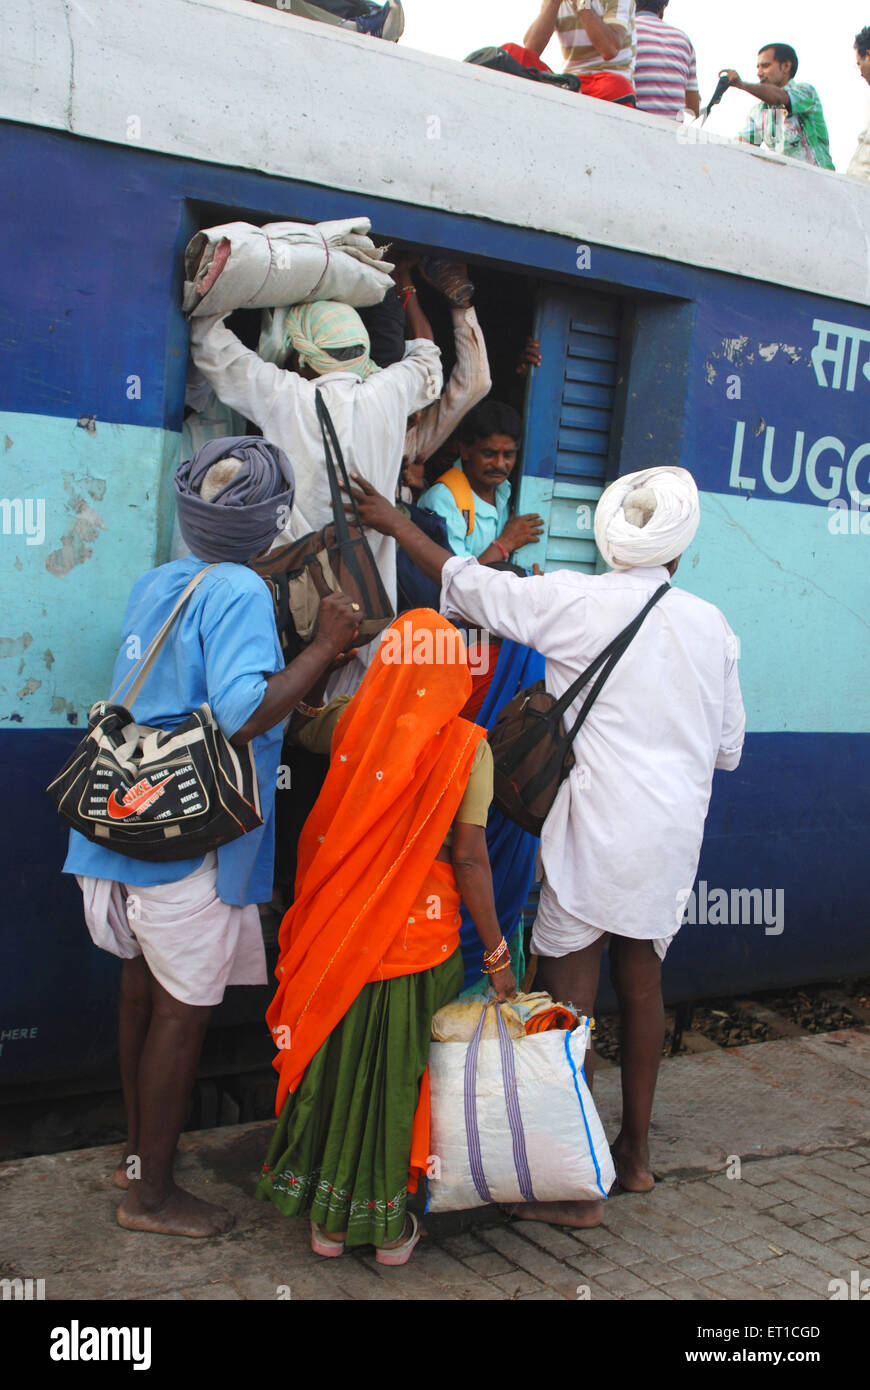 Commuters trying to board in luggage coach in train ; Jodhpur ; Rajasthan ; India Stock Photo